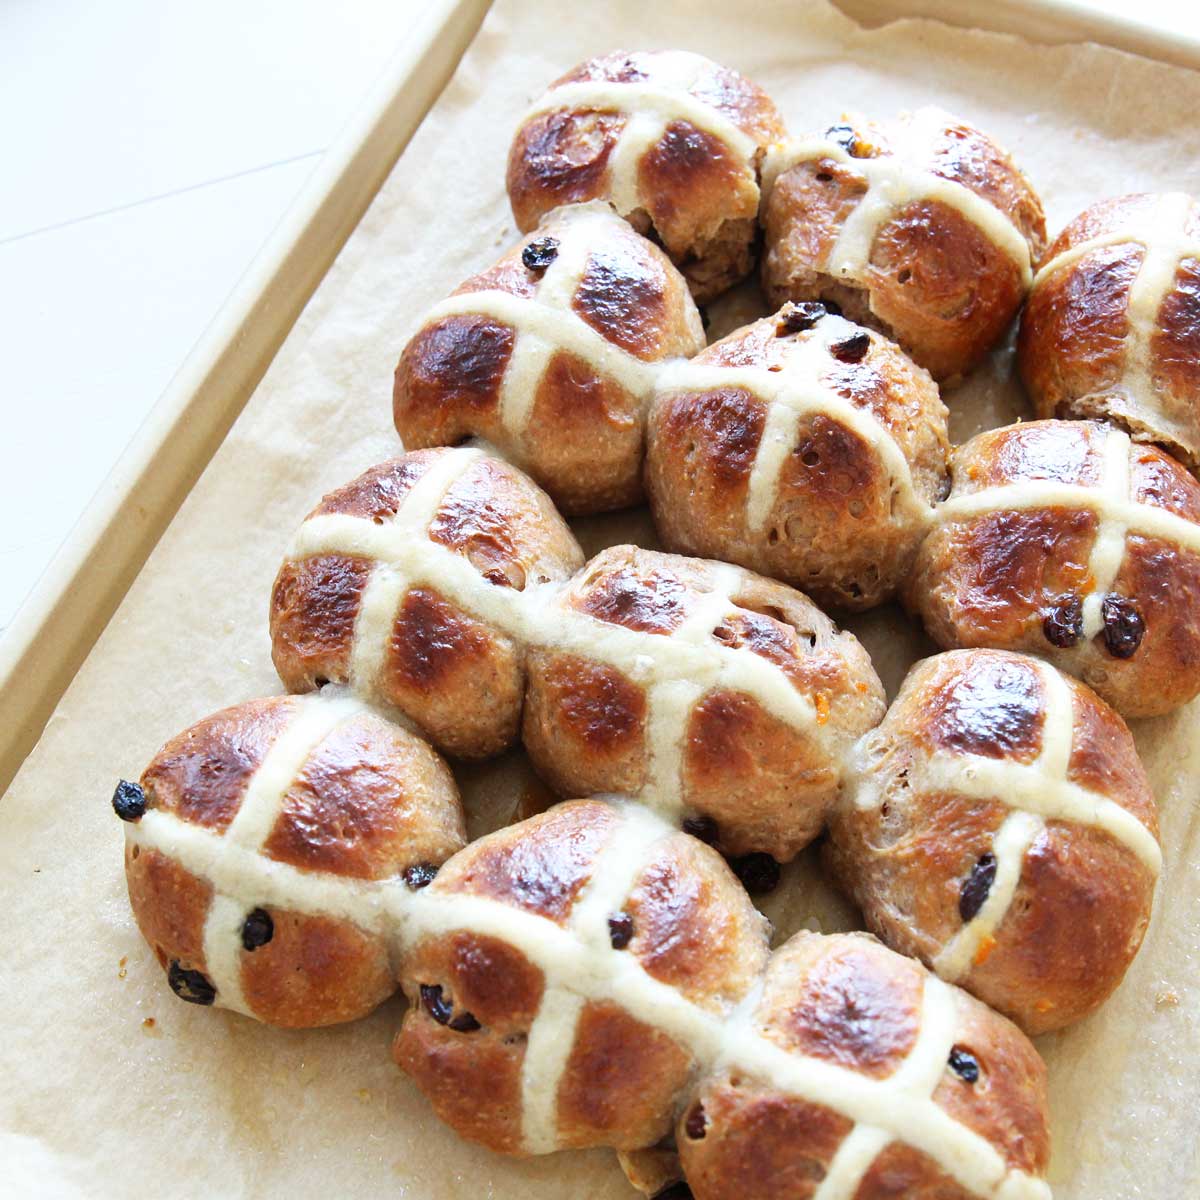 Soft & Fluffy Ricotta Cheese Hot Cross Buns - Perfect for Easter! - Peanut Butter Easter Eggs